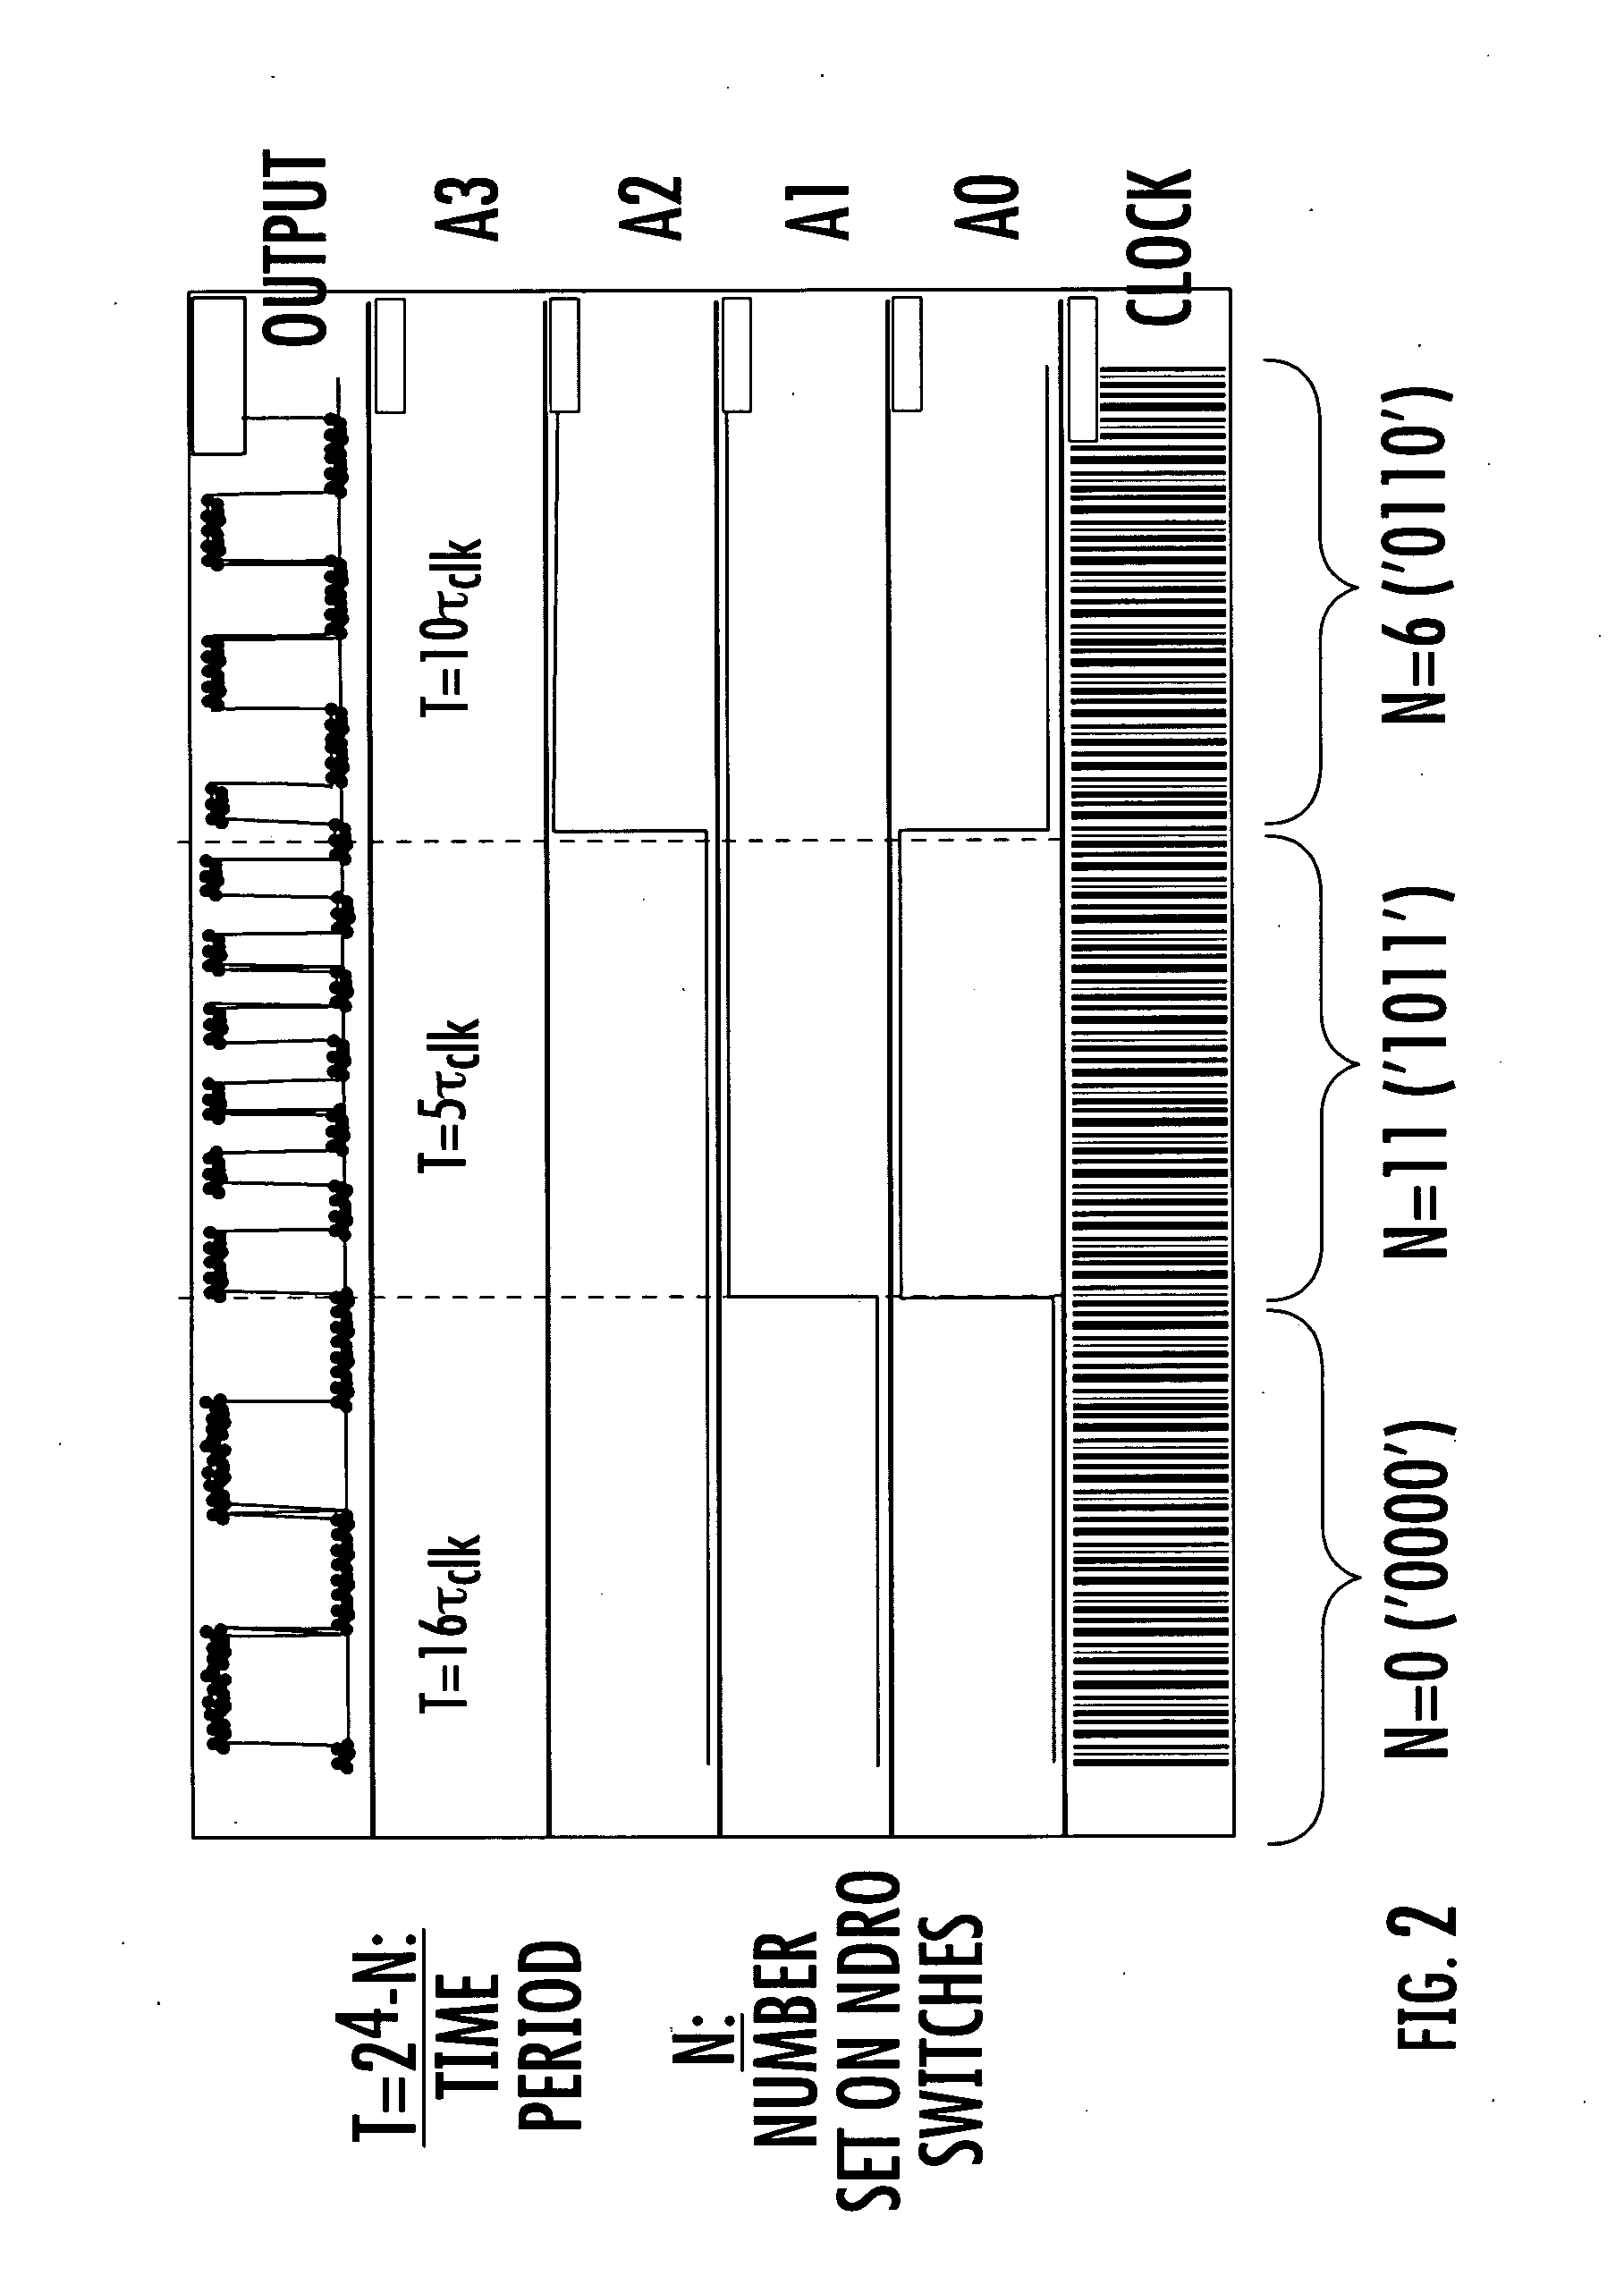 Digital programmable frequency divider